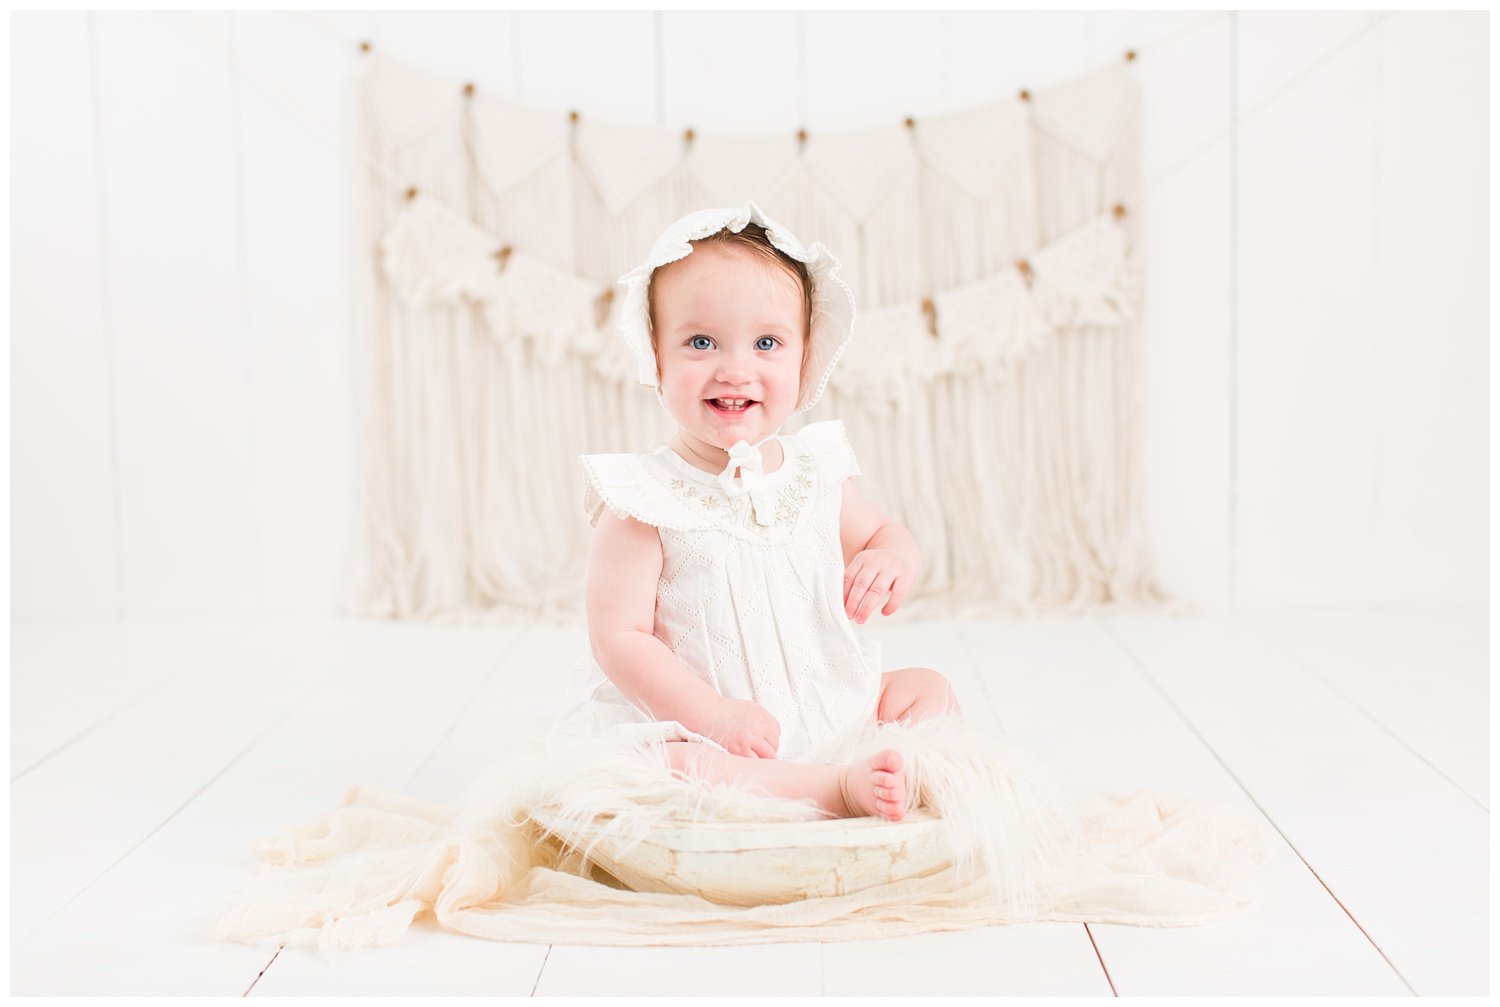 Baby Cara dressed in a vintage white romper and bonnet sitting in a rustic cream bowl with a boho macrame background | CB Studio